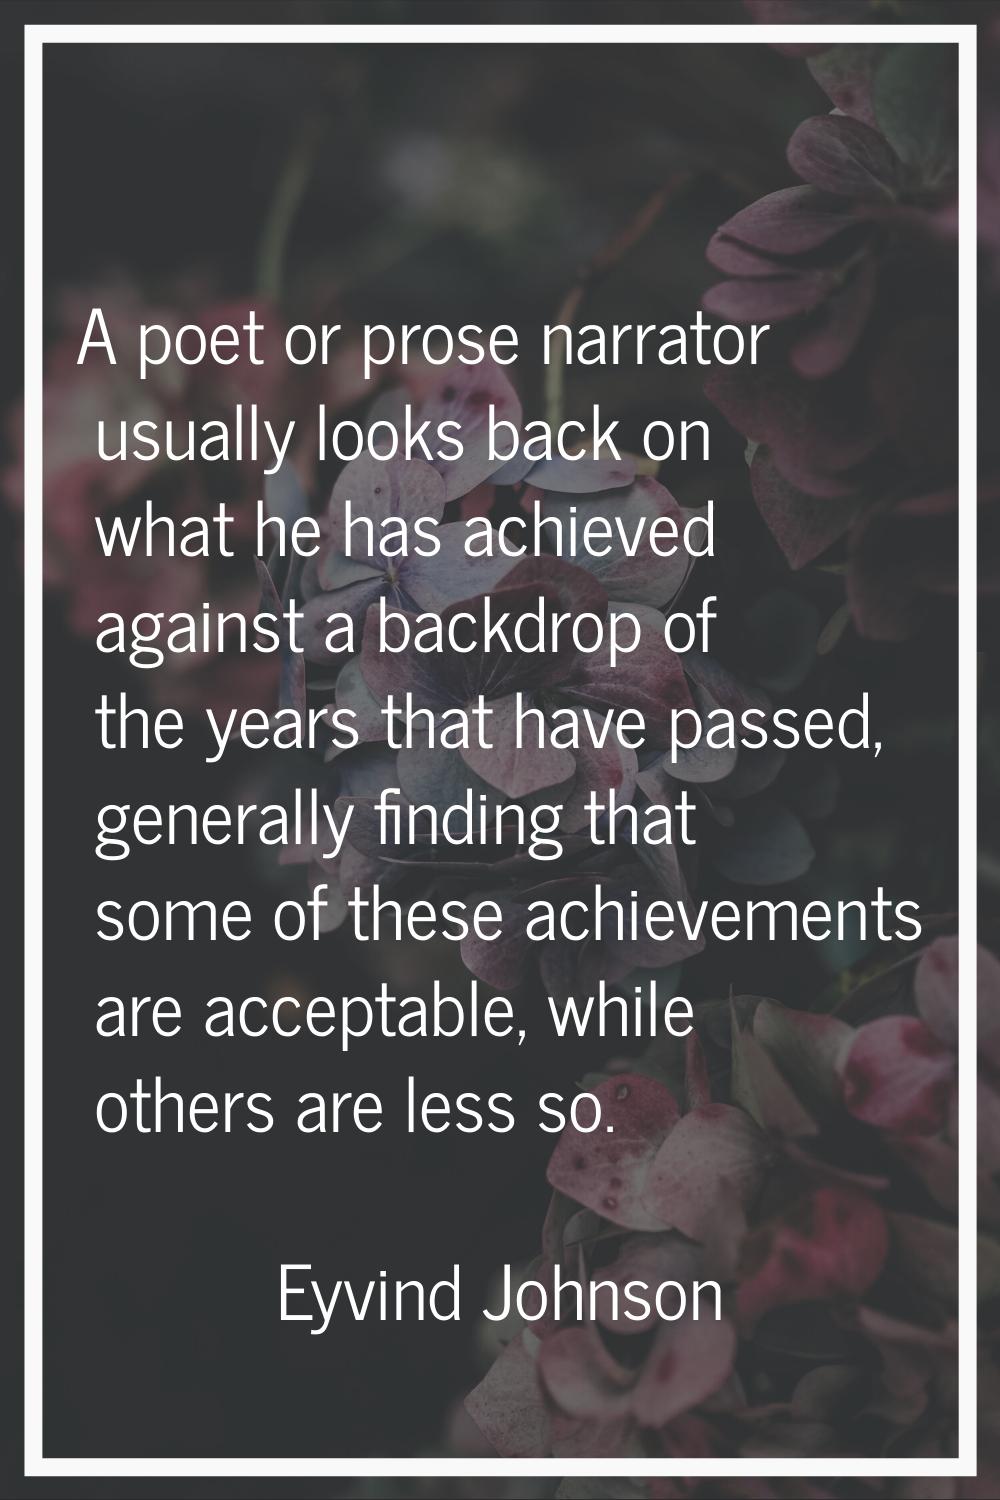 A poet or prose narrator usually looks back on what he has achieved against a backdrop of the years